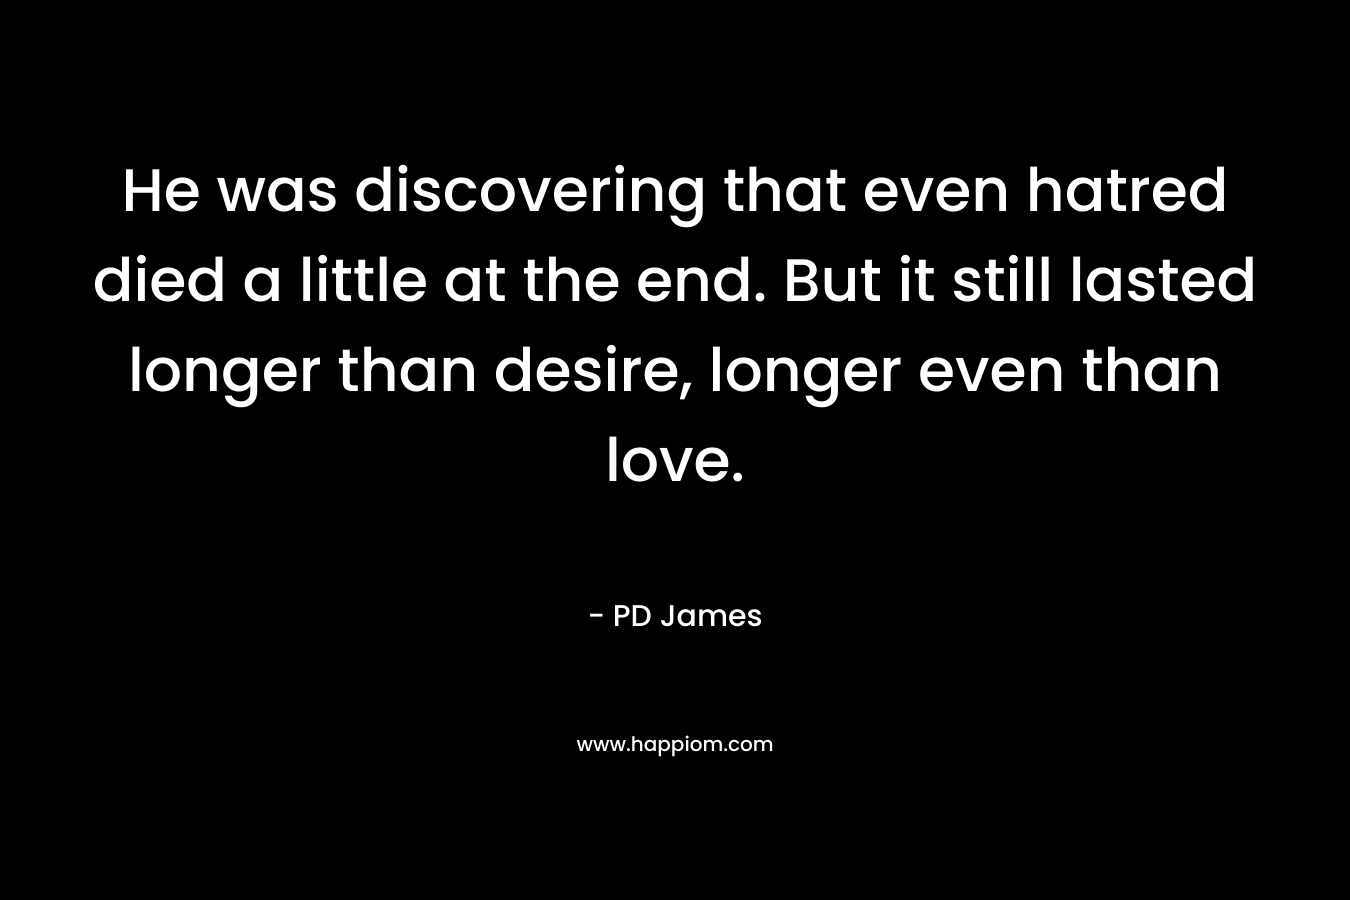 He was discovering that even hatred died a little at the end. But it still lasted longer than desire, longer even than love.